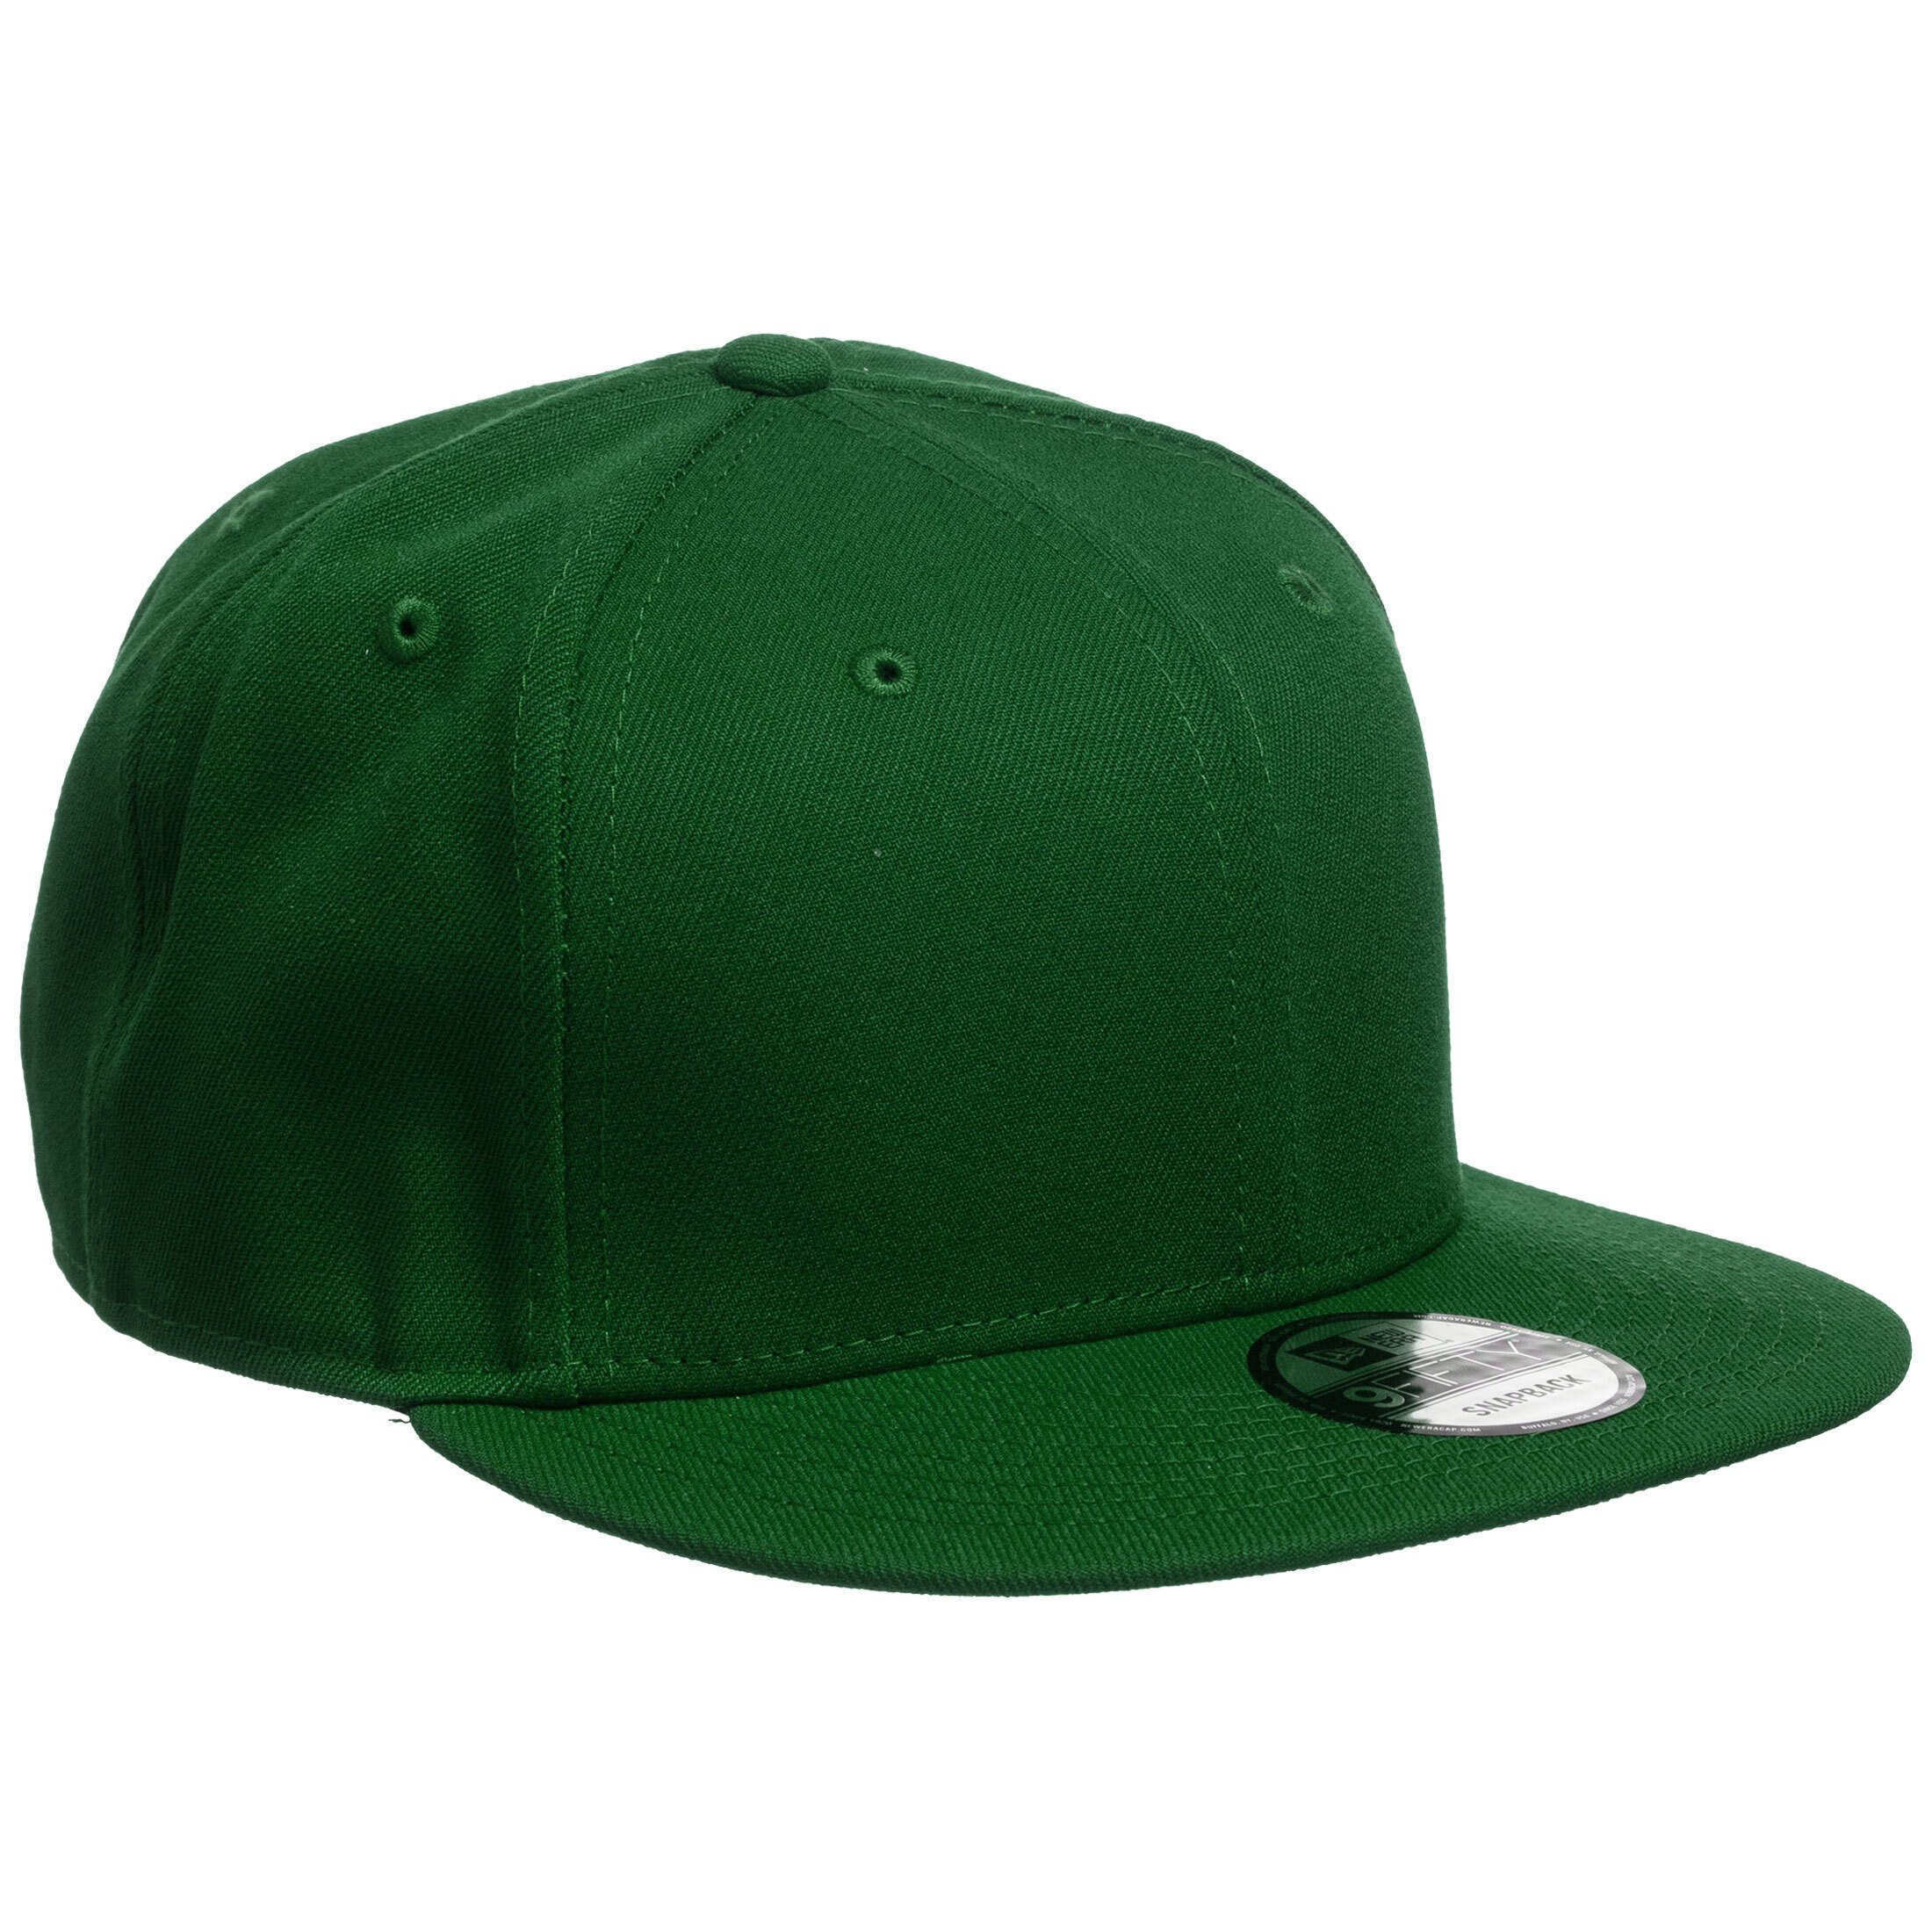 New Era Fitted Cap »9Fifty Snapback Cap« online kaufen | OTTO